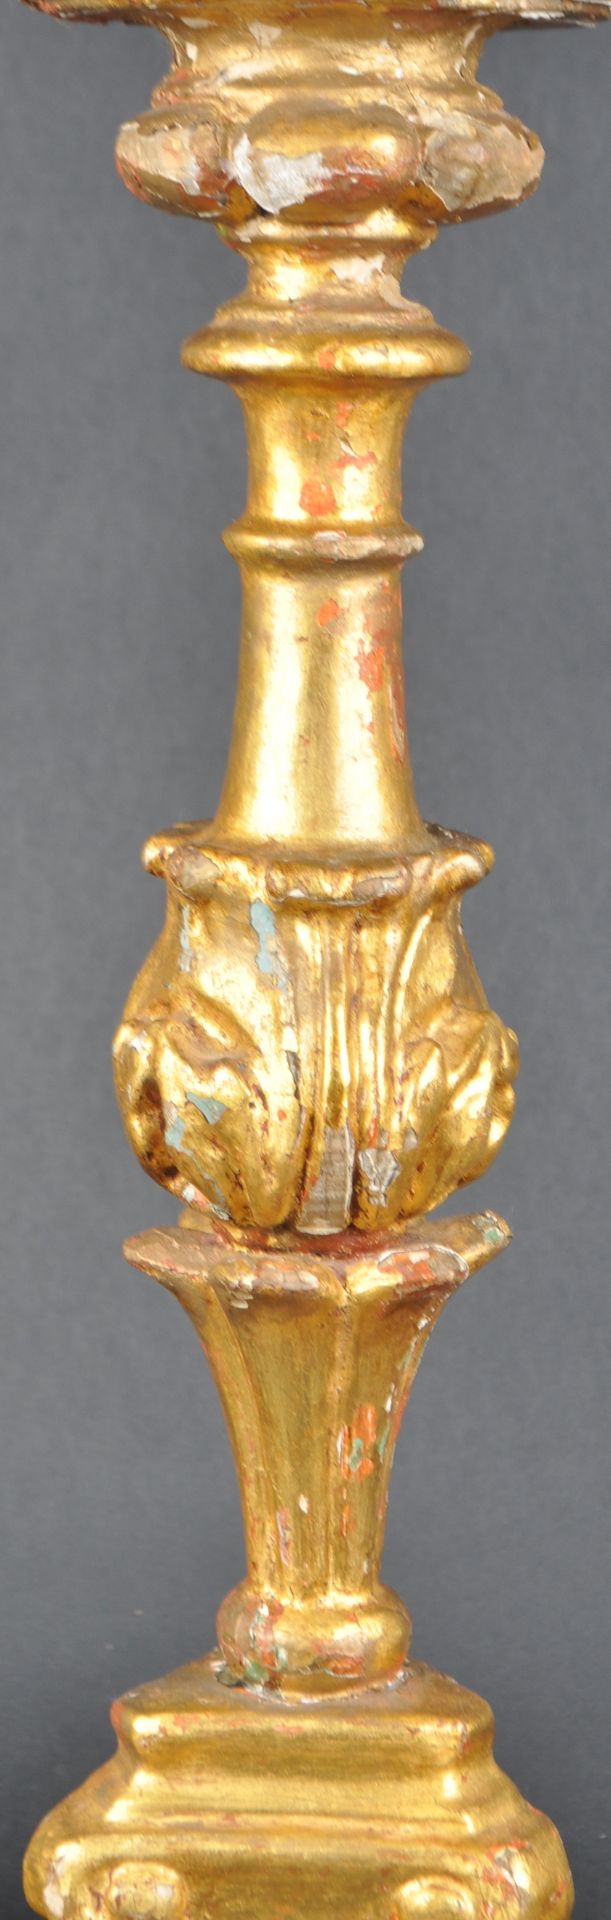 19TH CENTURY CARVED GILT WOOD CHURCH ALTAR CANDLESTICK - Image 3 of 4